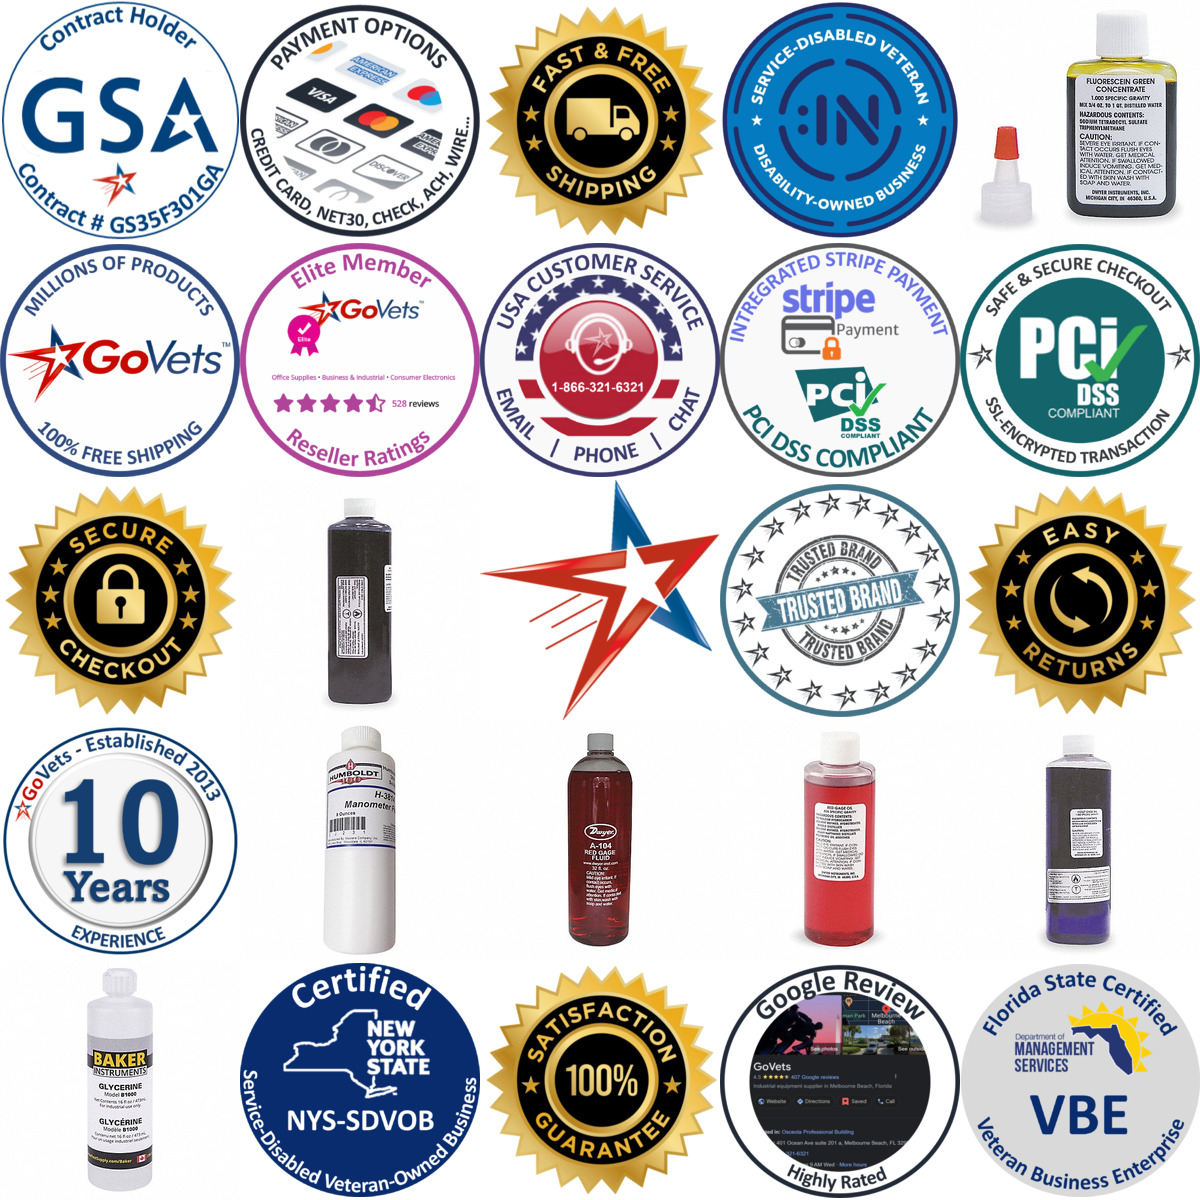 A selection of Gauge Oils and Liquids products on GoVets